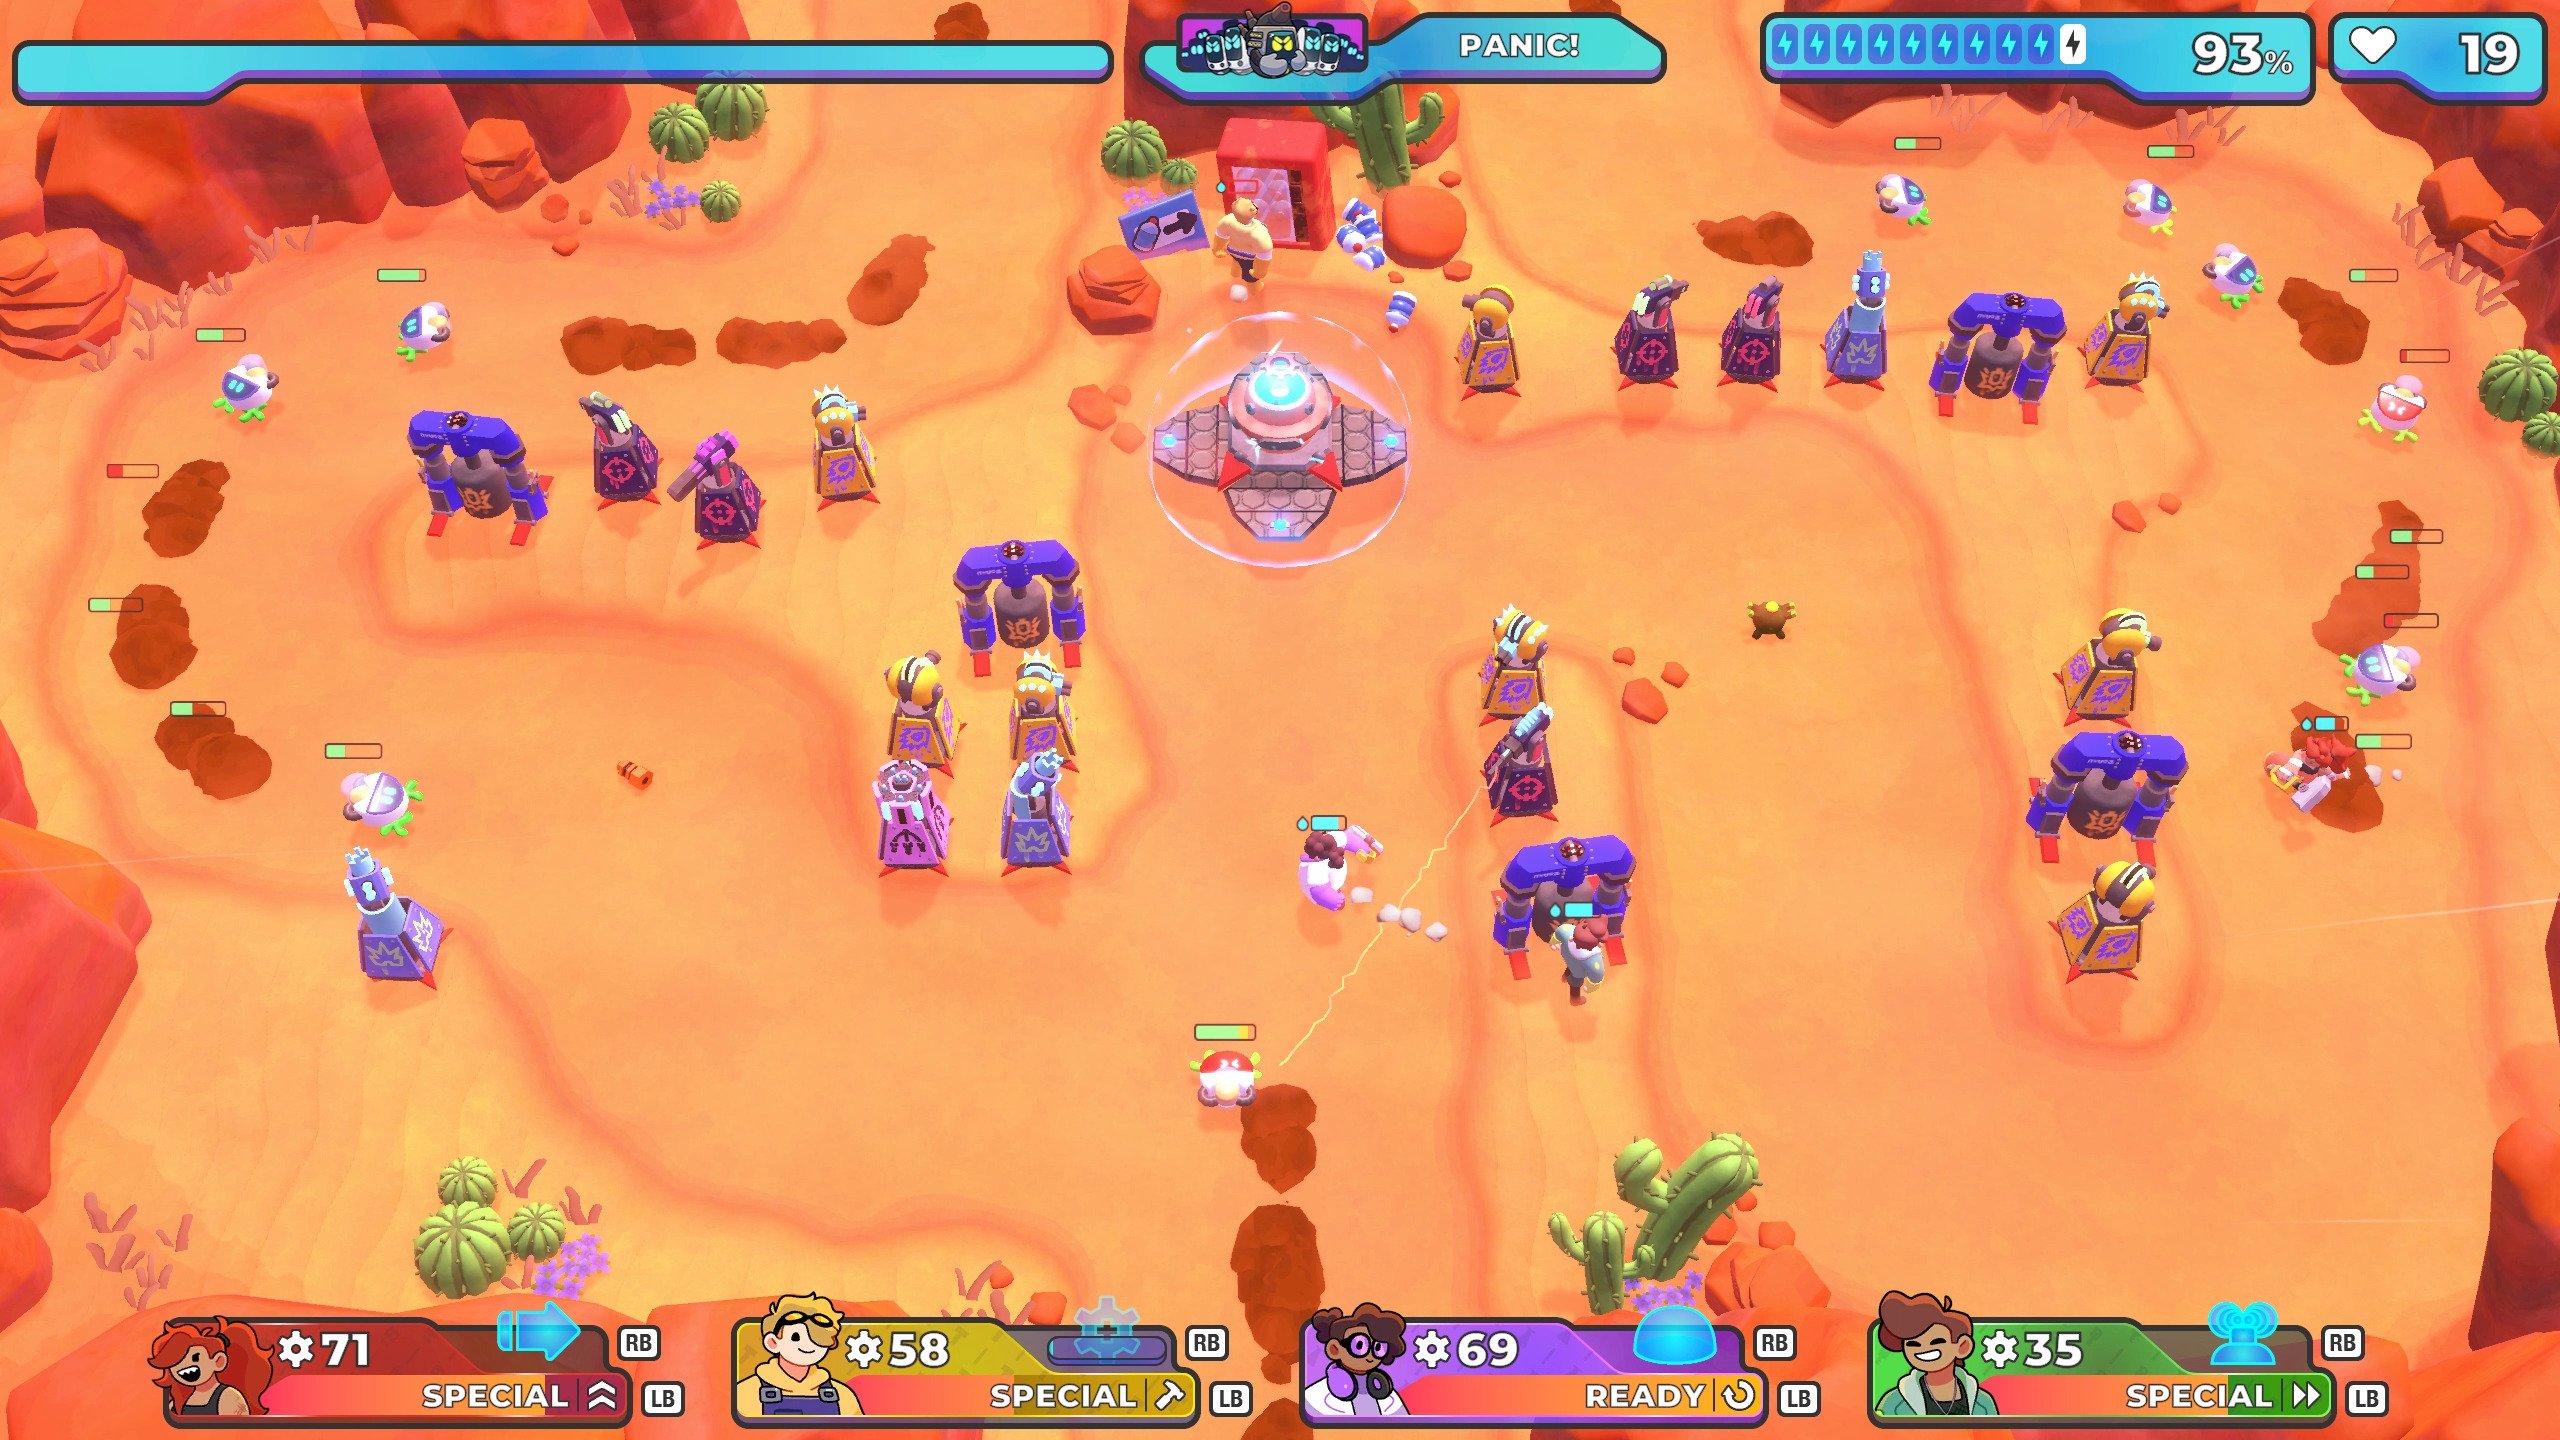 pence reservation tempo Strategic tower defense game Bish Bash Bots announced for PS5, Xbox Series,  PS4, Xbox One, Switch, and PC - Gematsu